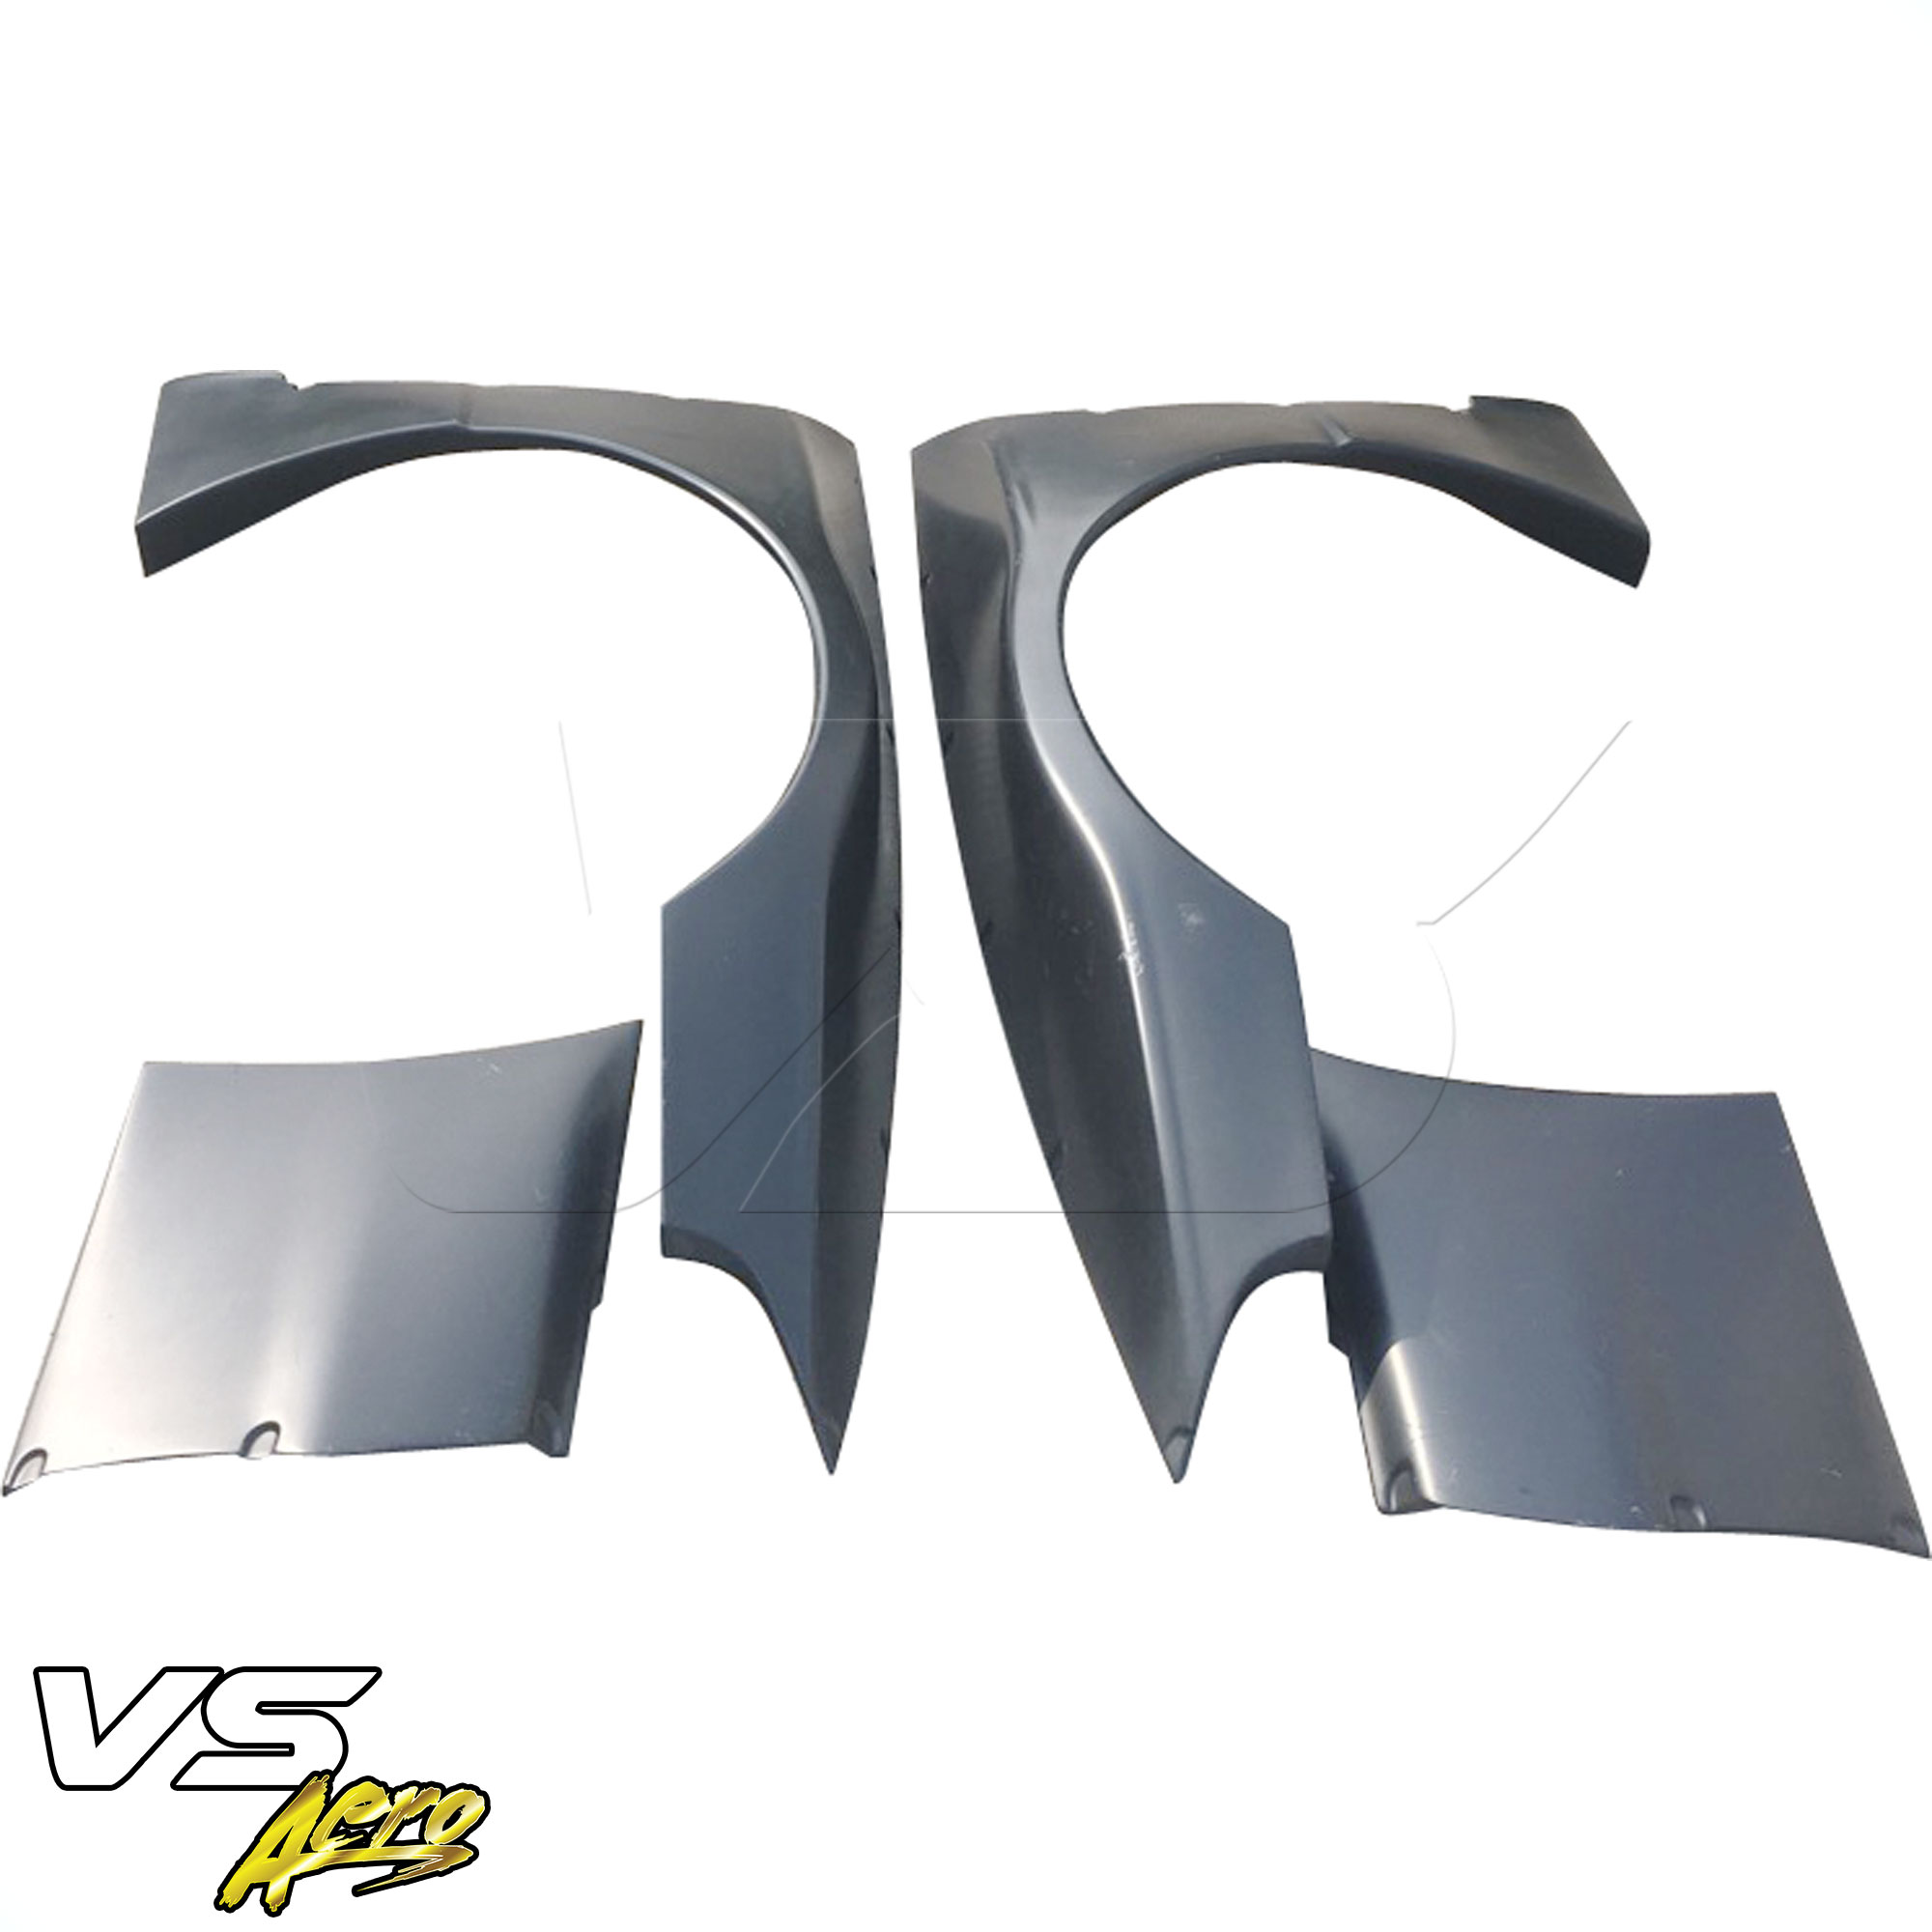 VSaero FRP TKYO Wide Body 40mm Fender Flares (front) 4pc > Nissan Skyline R32 1990-1994 > 2dr Coupe - Image 16